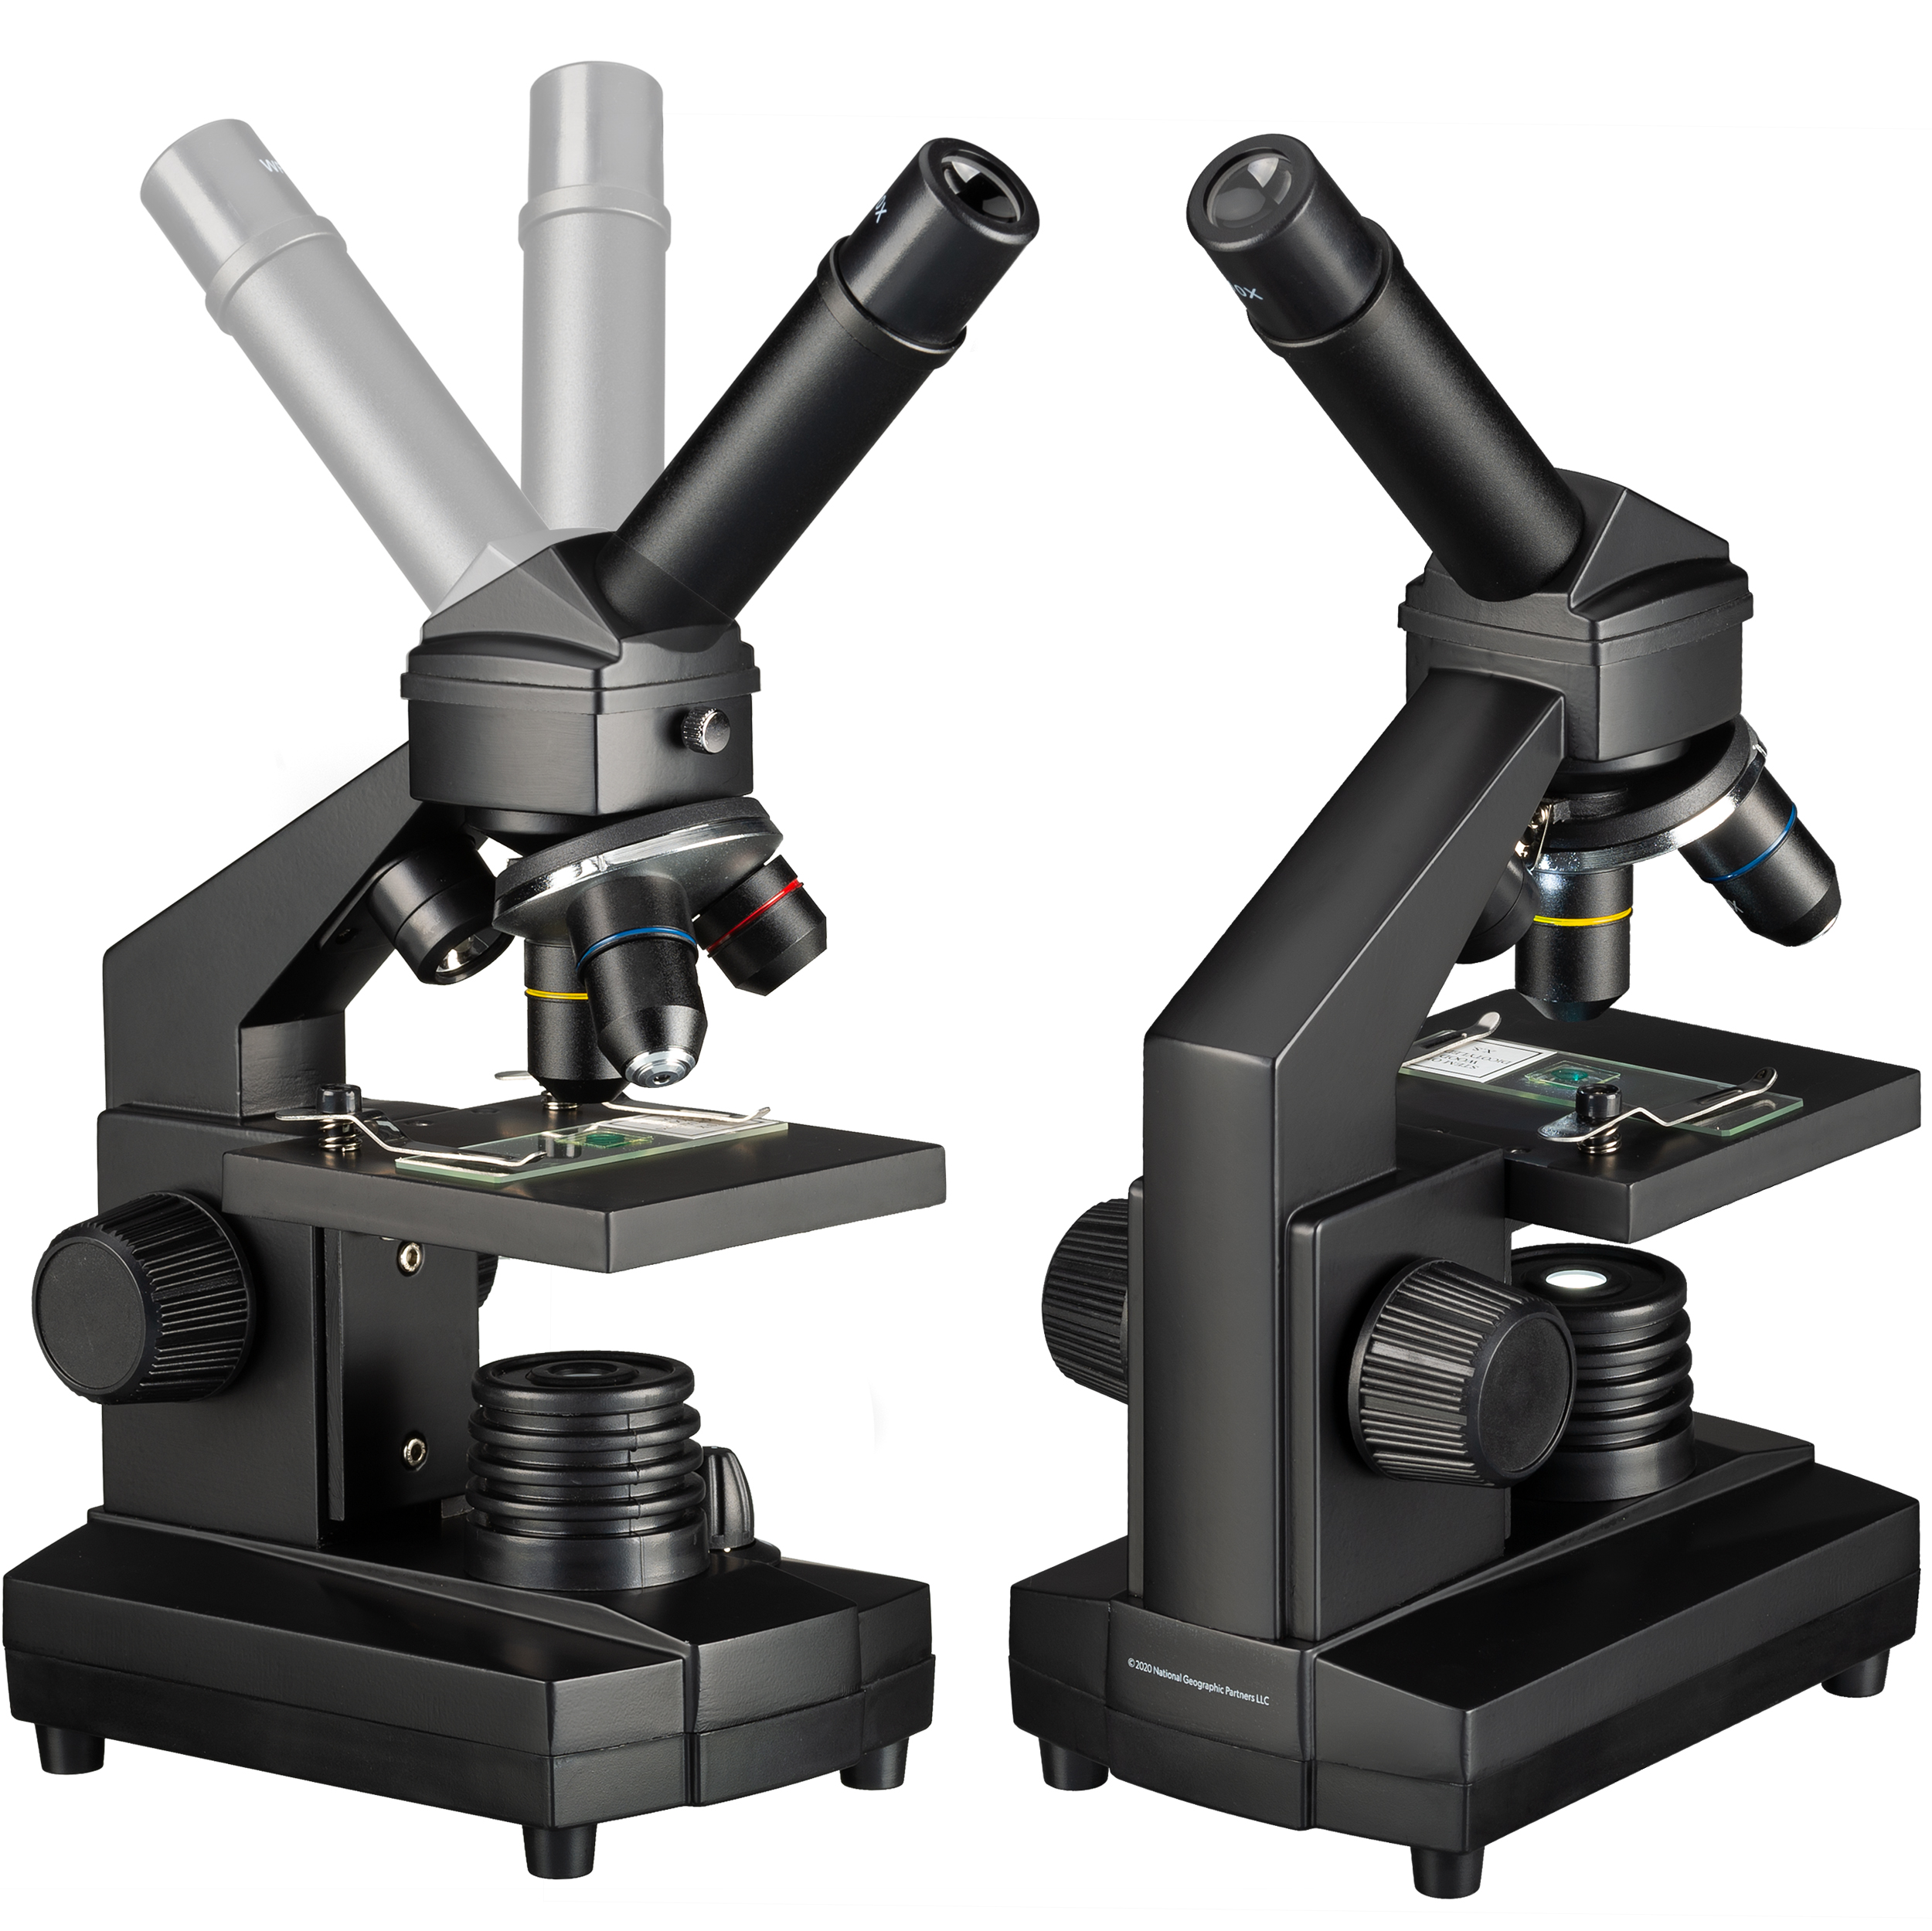 National Geographic 40x-1024x Microscope (valise et oculaire USB compris)